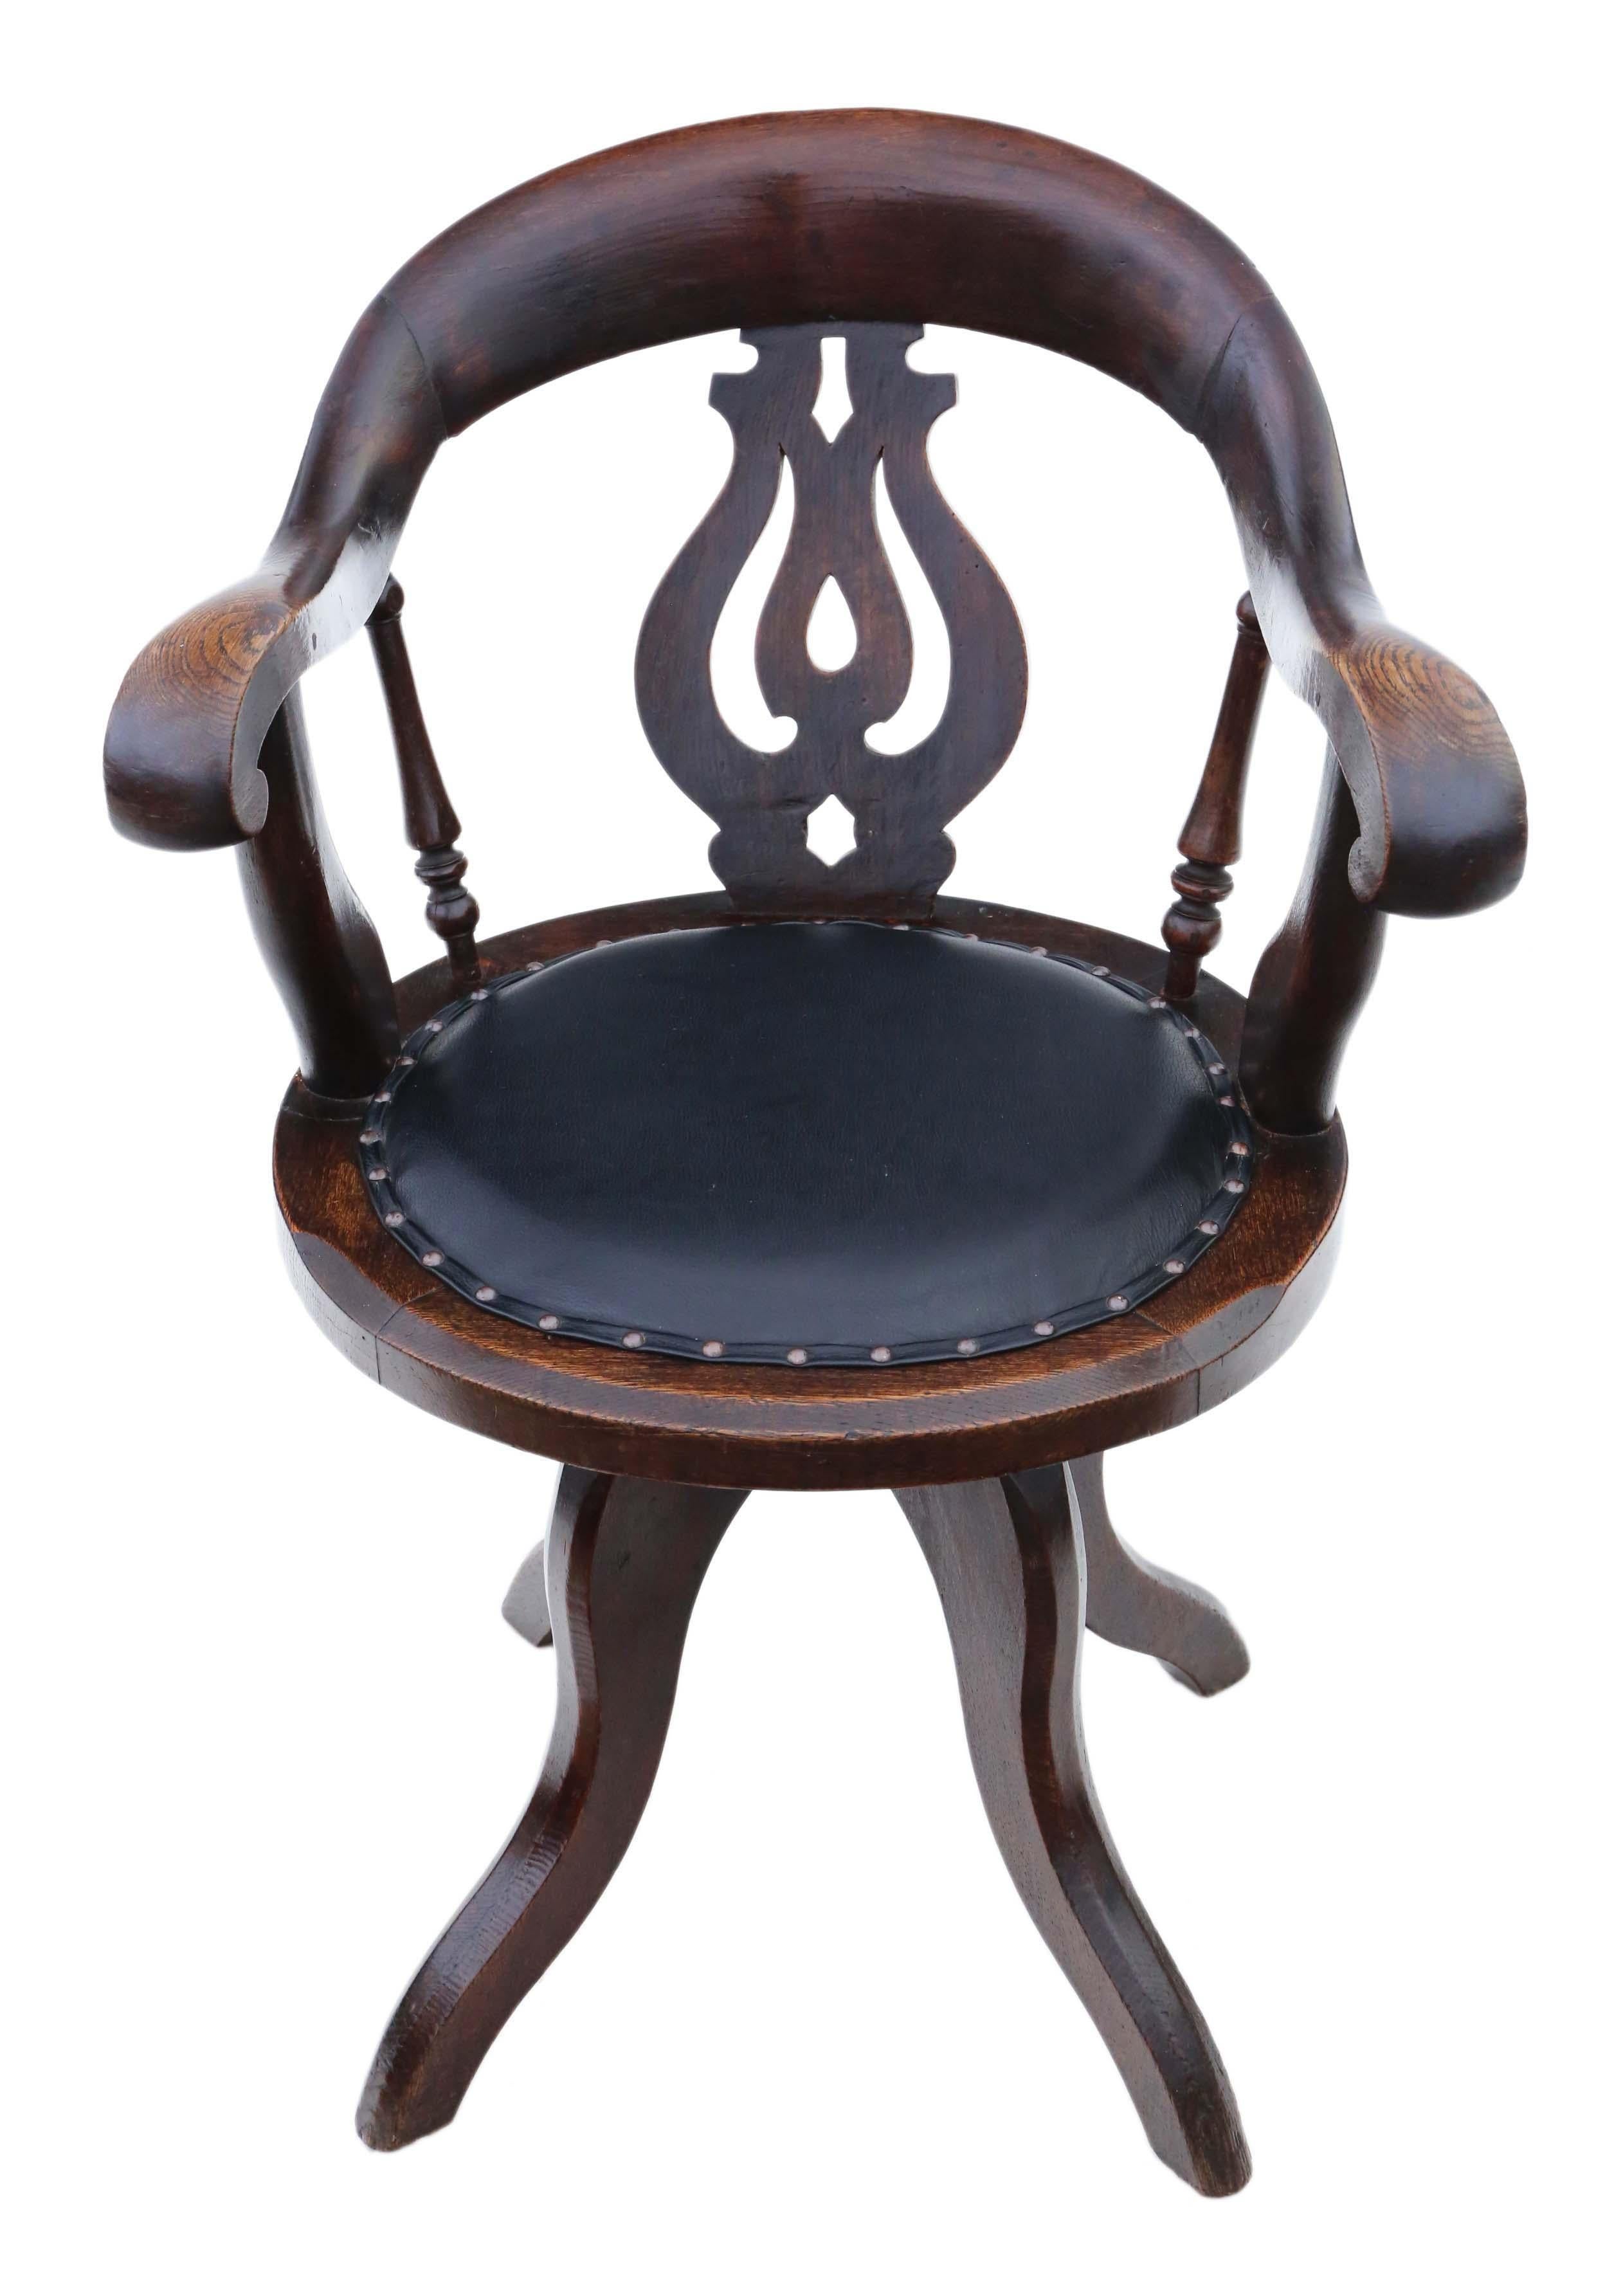 Antique fine quality Victorian C1880 oak and leather swivel desk office chair. New replacement black leather seat.

Fantastic quality decorative functional piece. Swivels freely without too much play in the mechanism.

Solid, heavy and strong